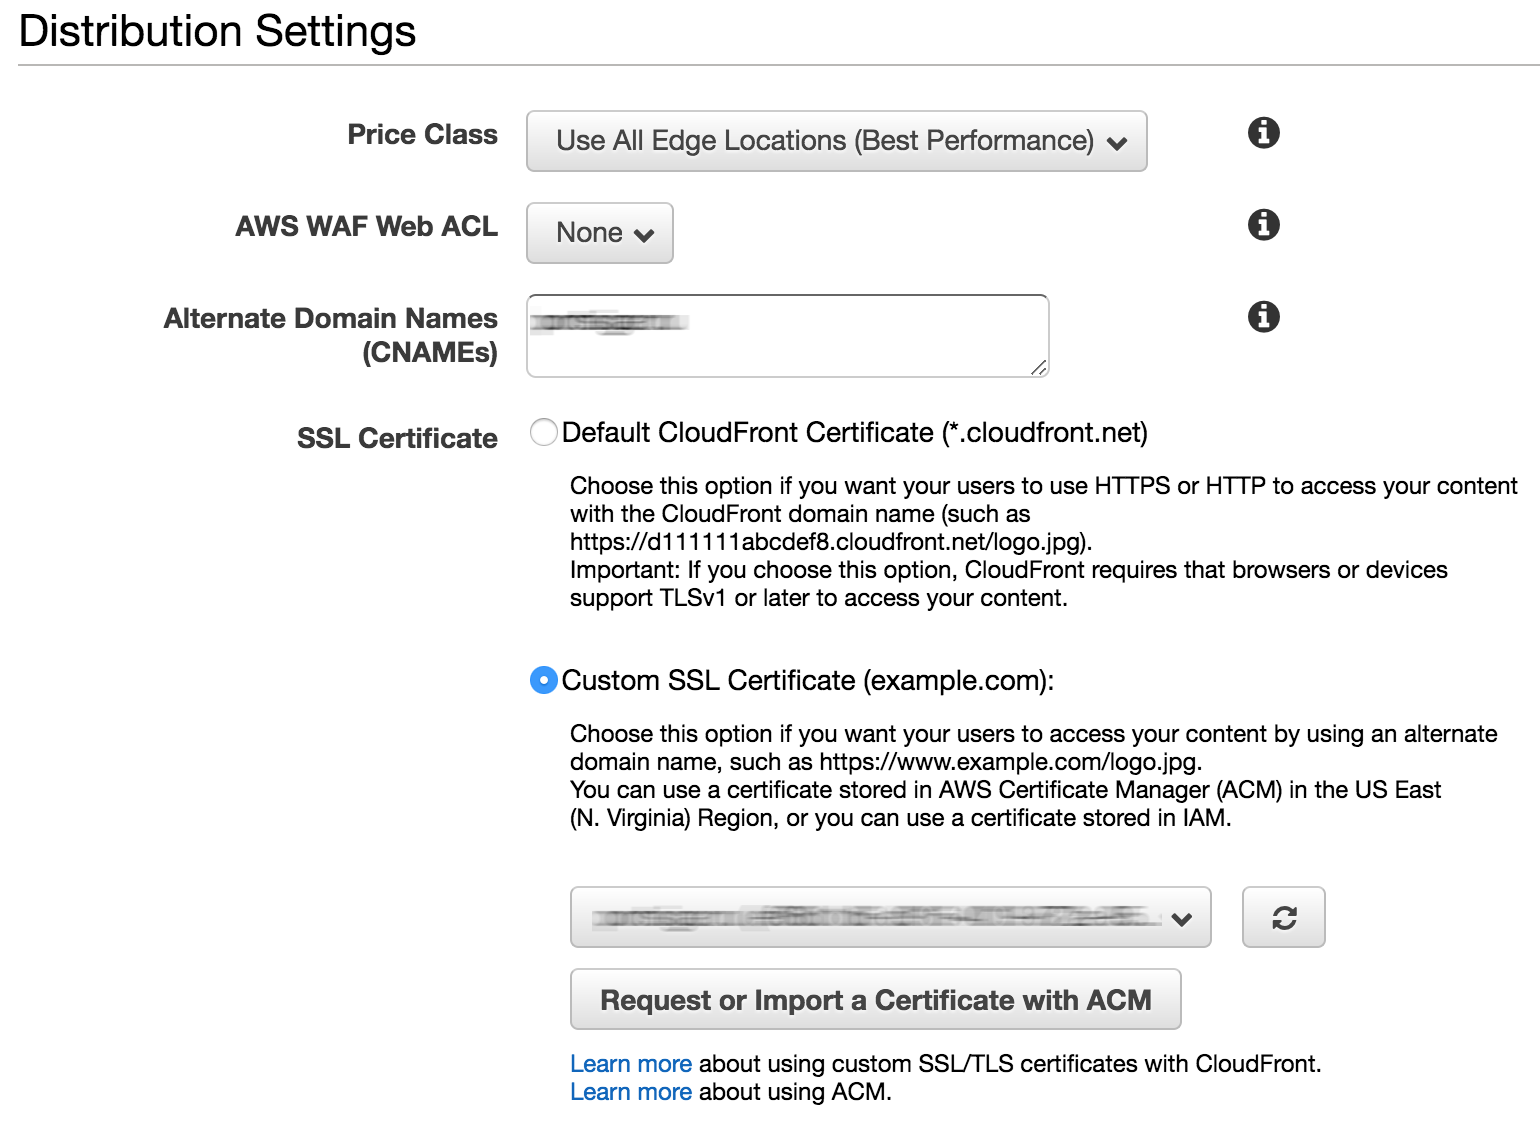 CloudFront Distribution with SSL and CNAME